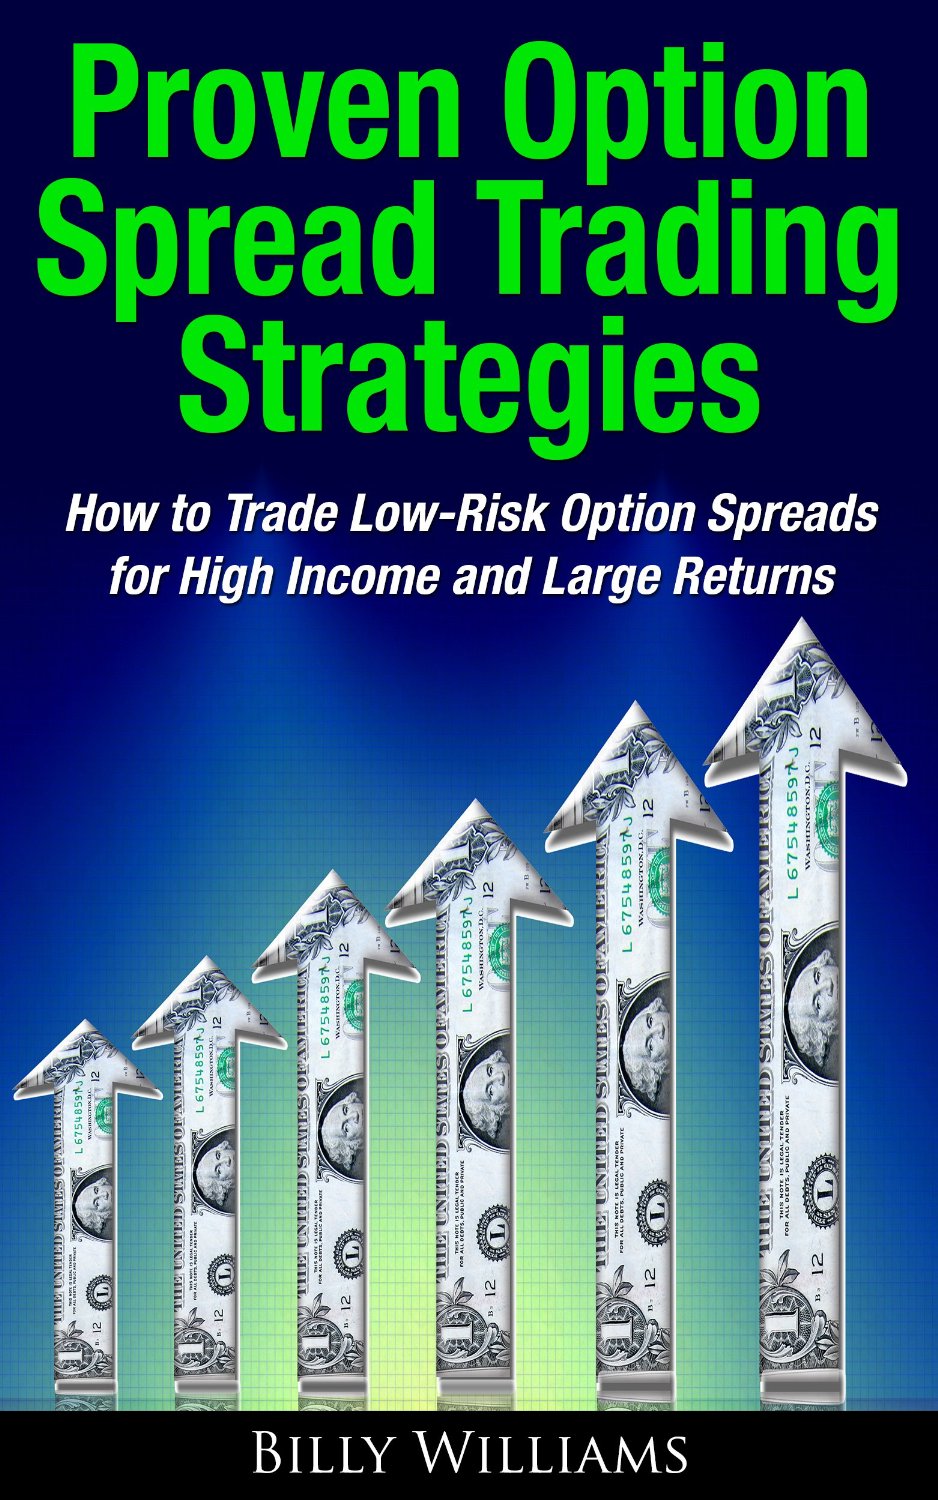 Proven Option Spread Trading Strategies by Billy Williams